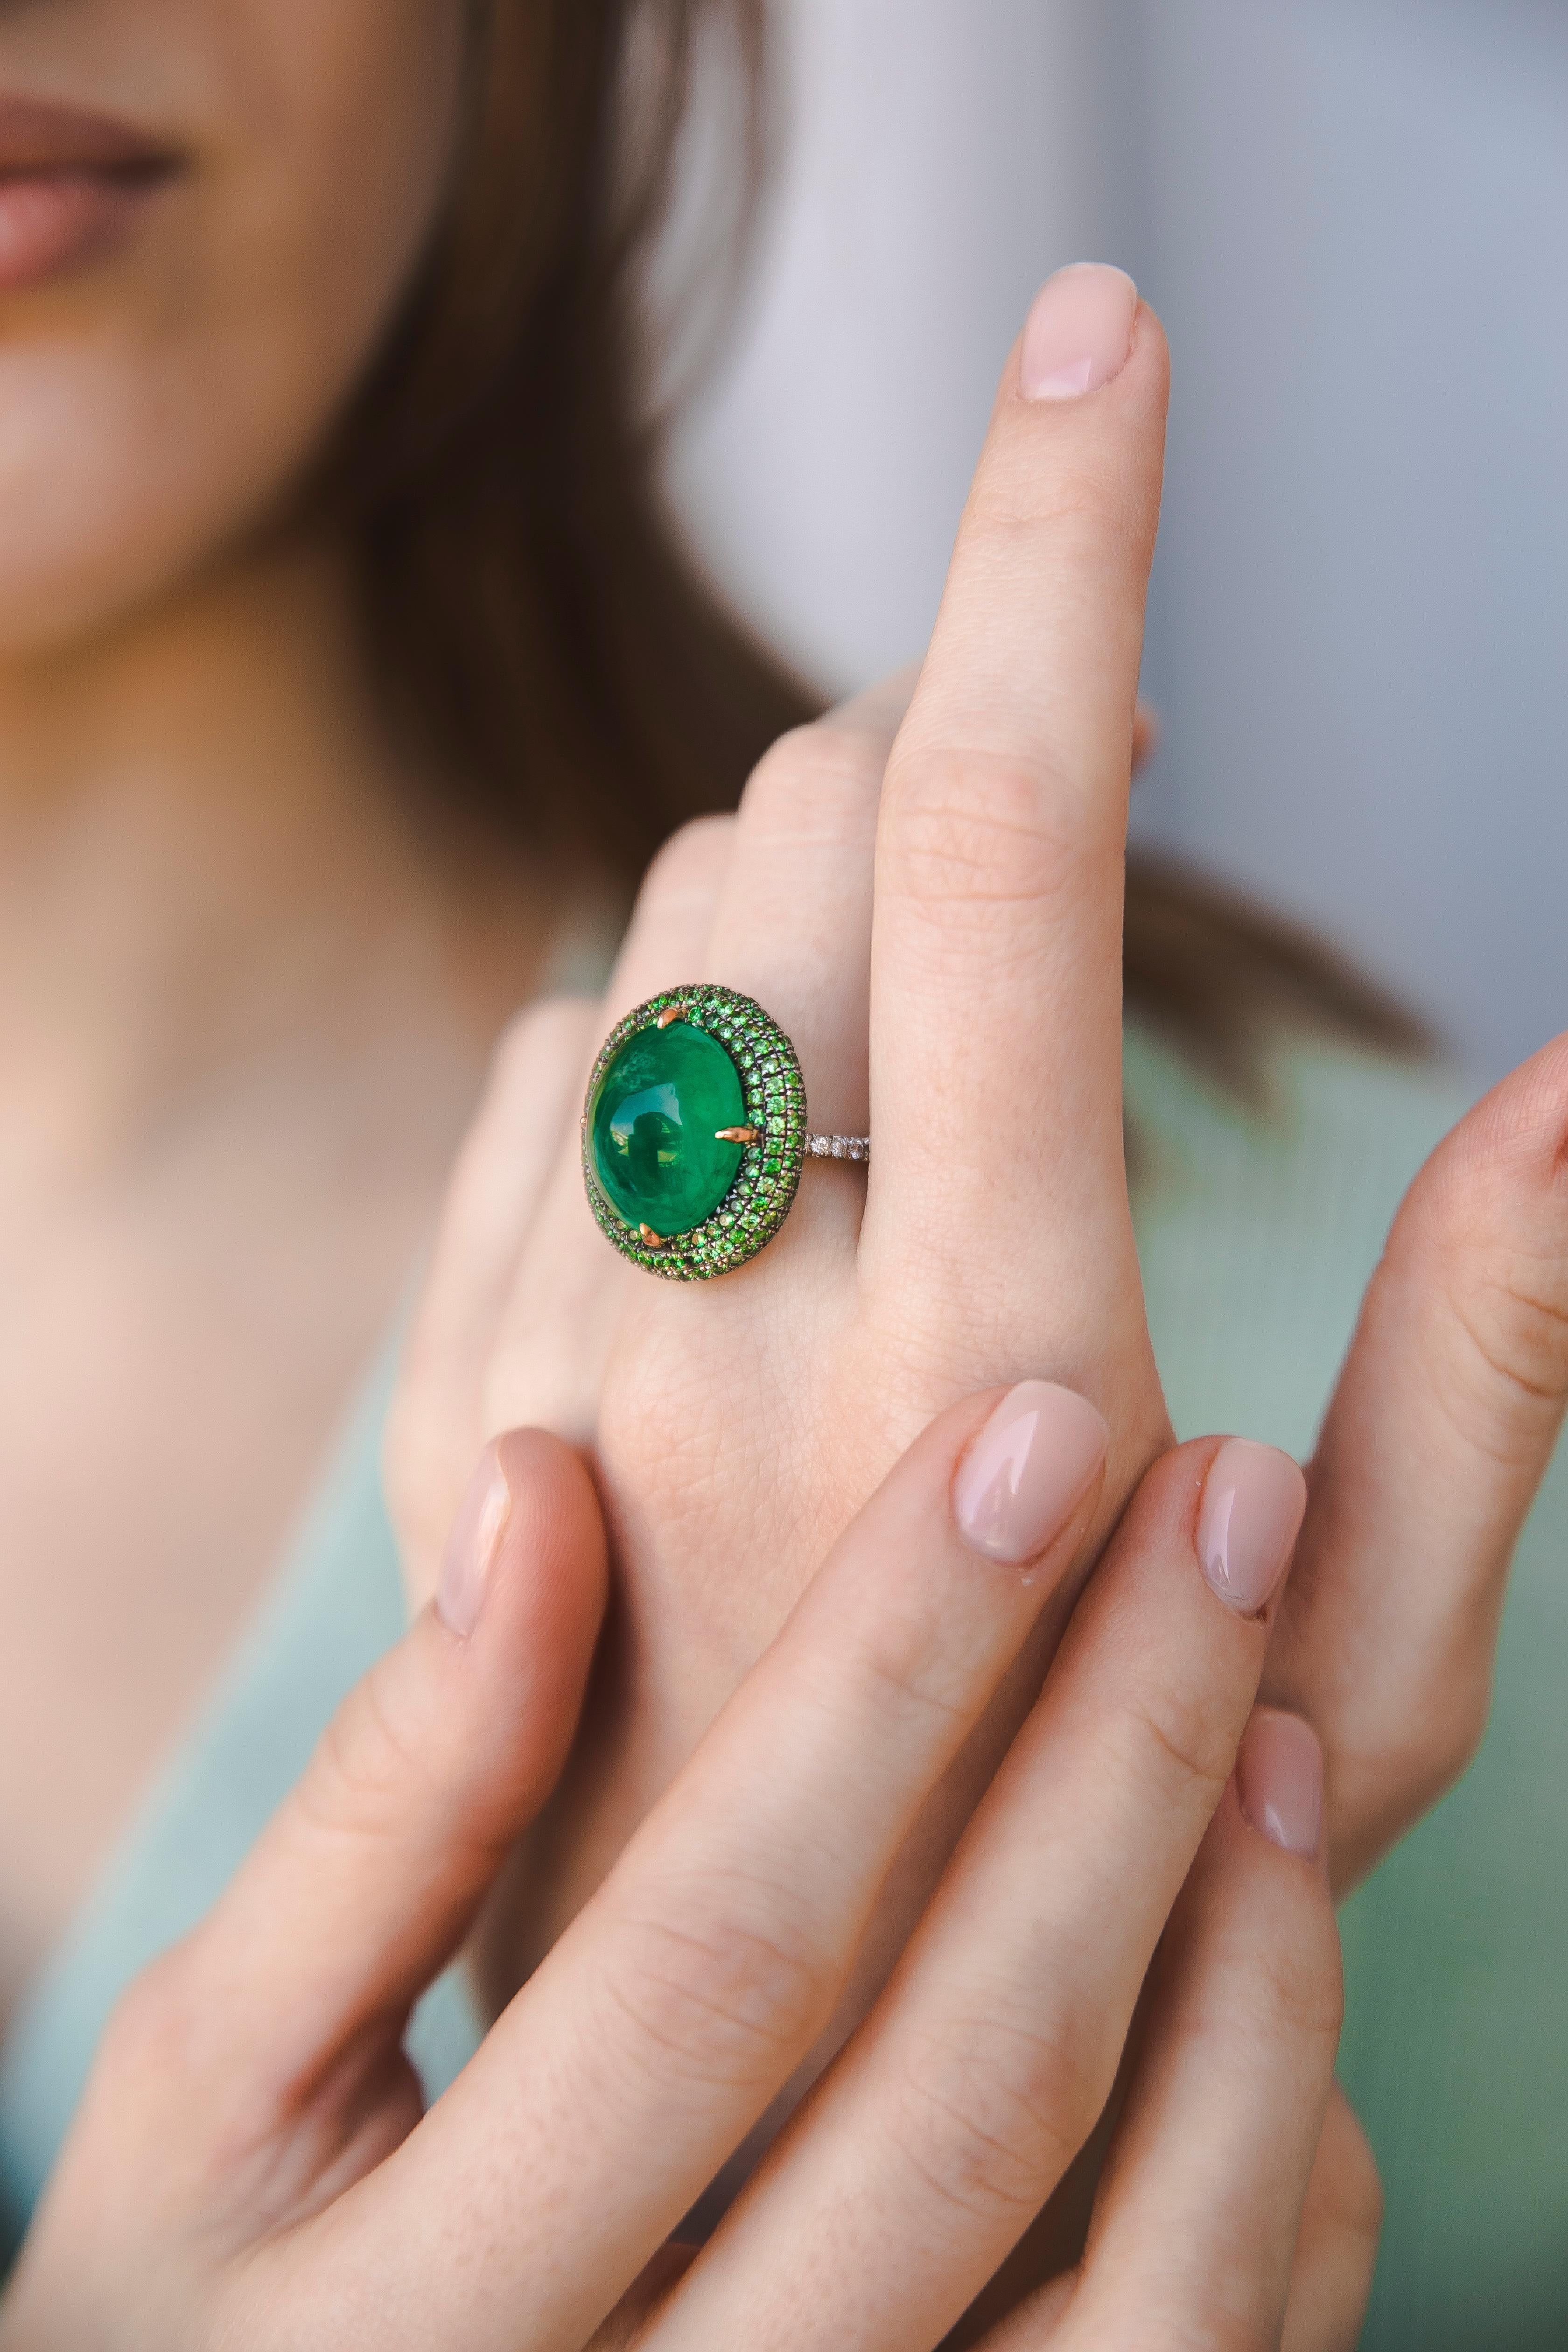 Cabochon Emerald weighting 20Ct is set with Tsavorite bright green stones and Diamonds. Fine ring of exceptional quality. 1970. 
The ring band is set with fine Diamonds. The difference of the deep green colour of the Emerald and the light eclectic